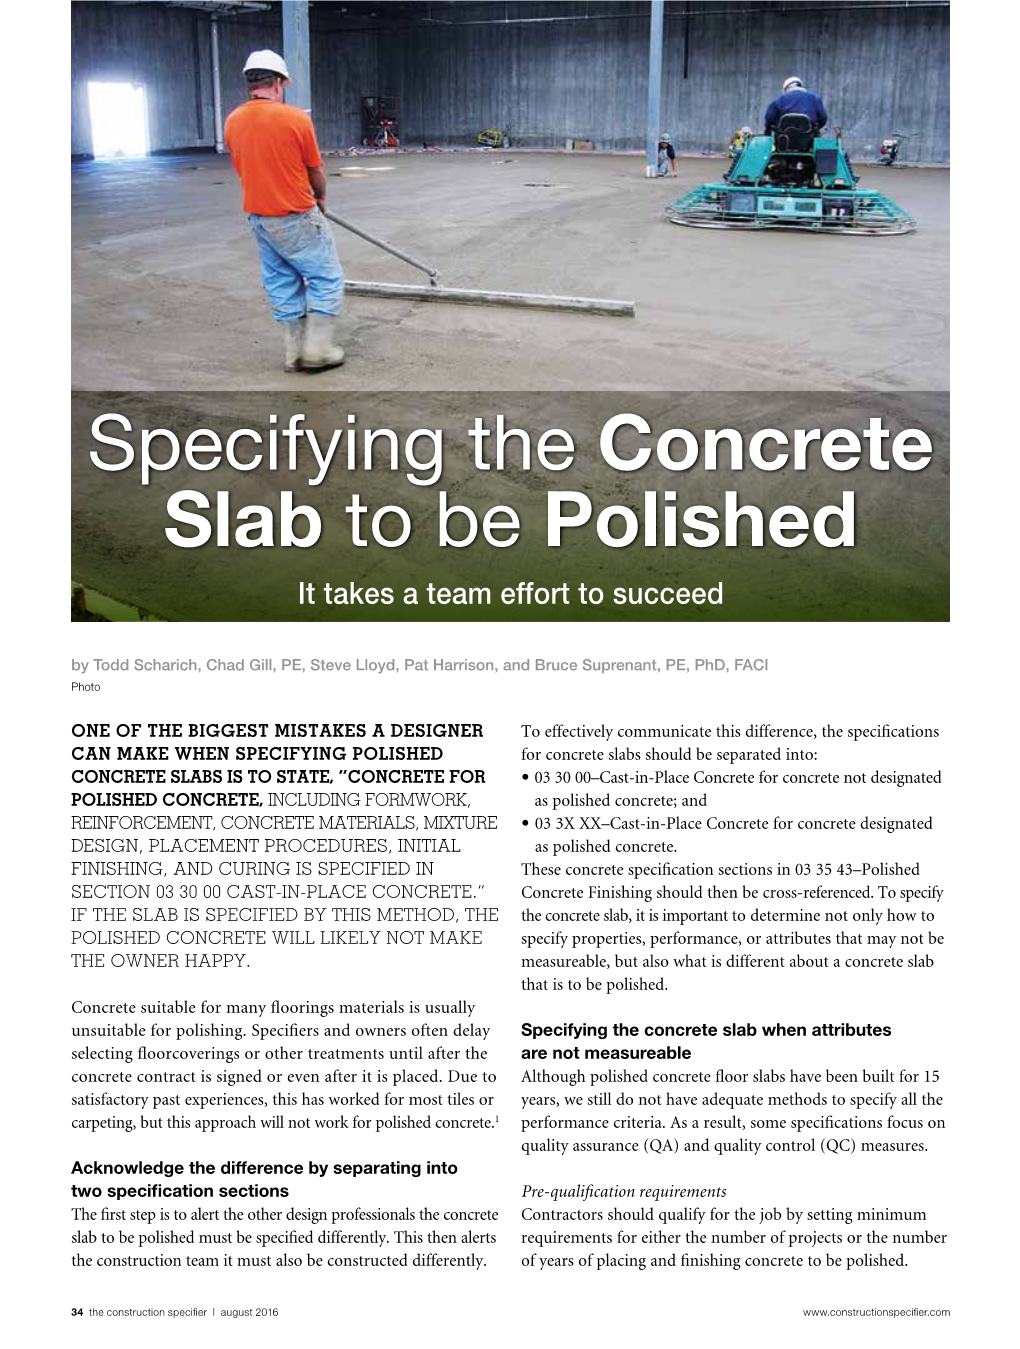 Specifying the Concrete Slab to Be Polished It Takes a Team Effort to Succeed